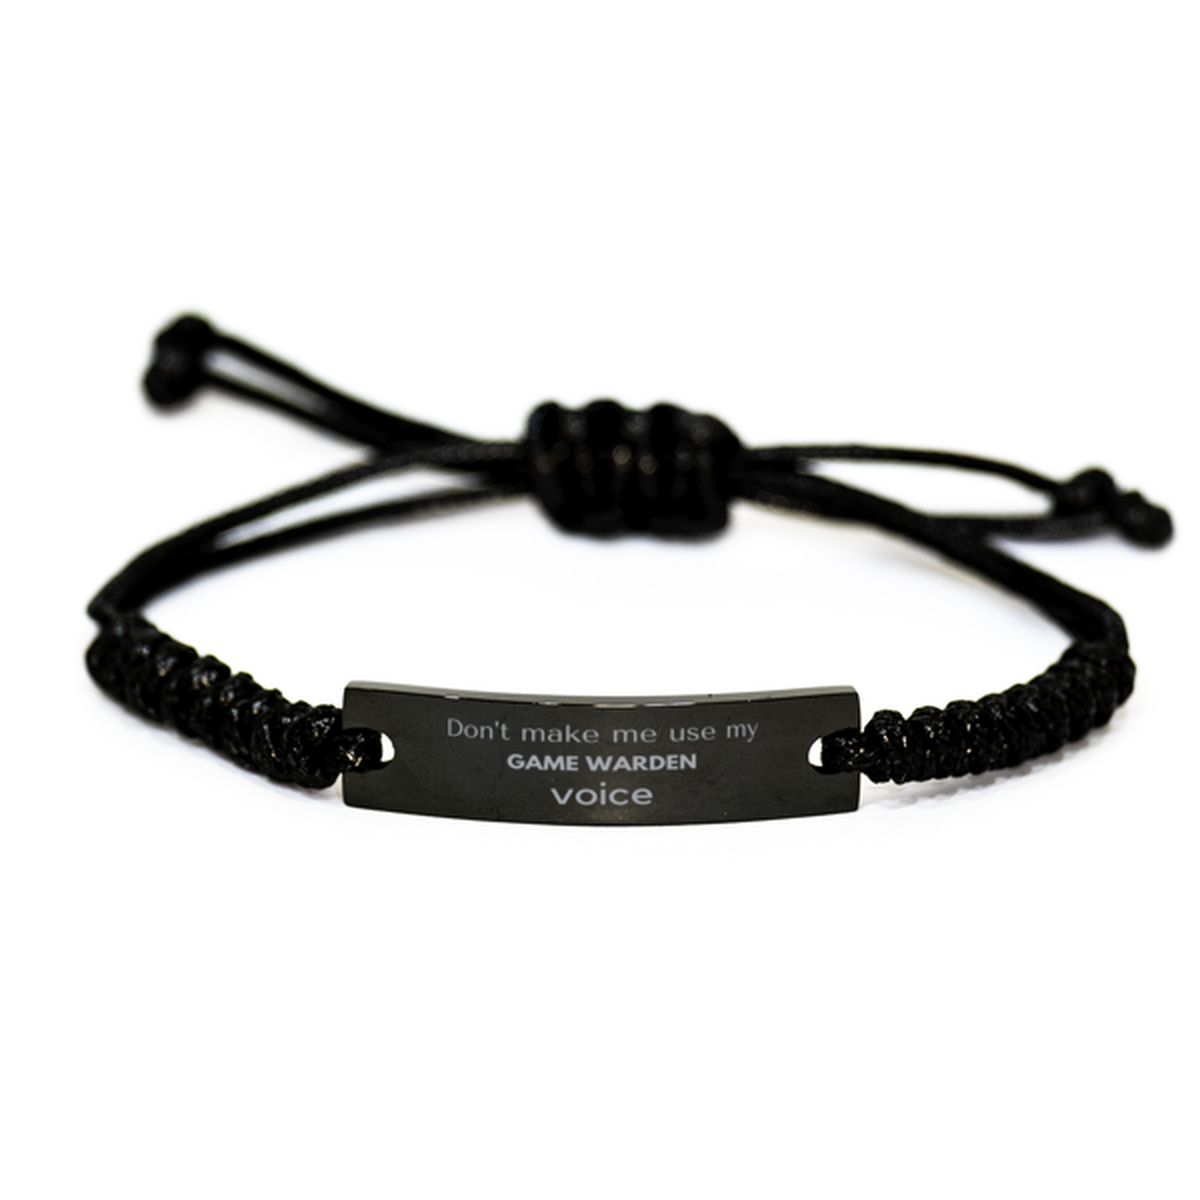 Don't make me use my Game Warden voice, Sarcasm Game Warden Gifts, Christmas Game Warden Black Rope Bracelet Birthday Unique Gifts For Game Warden Coworkers, Men, Women, Colleague, Friends